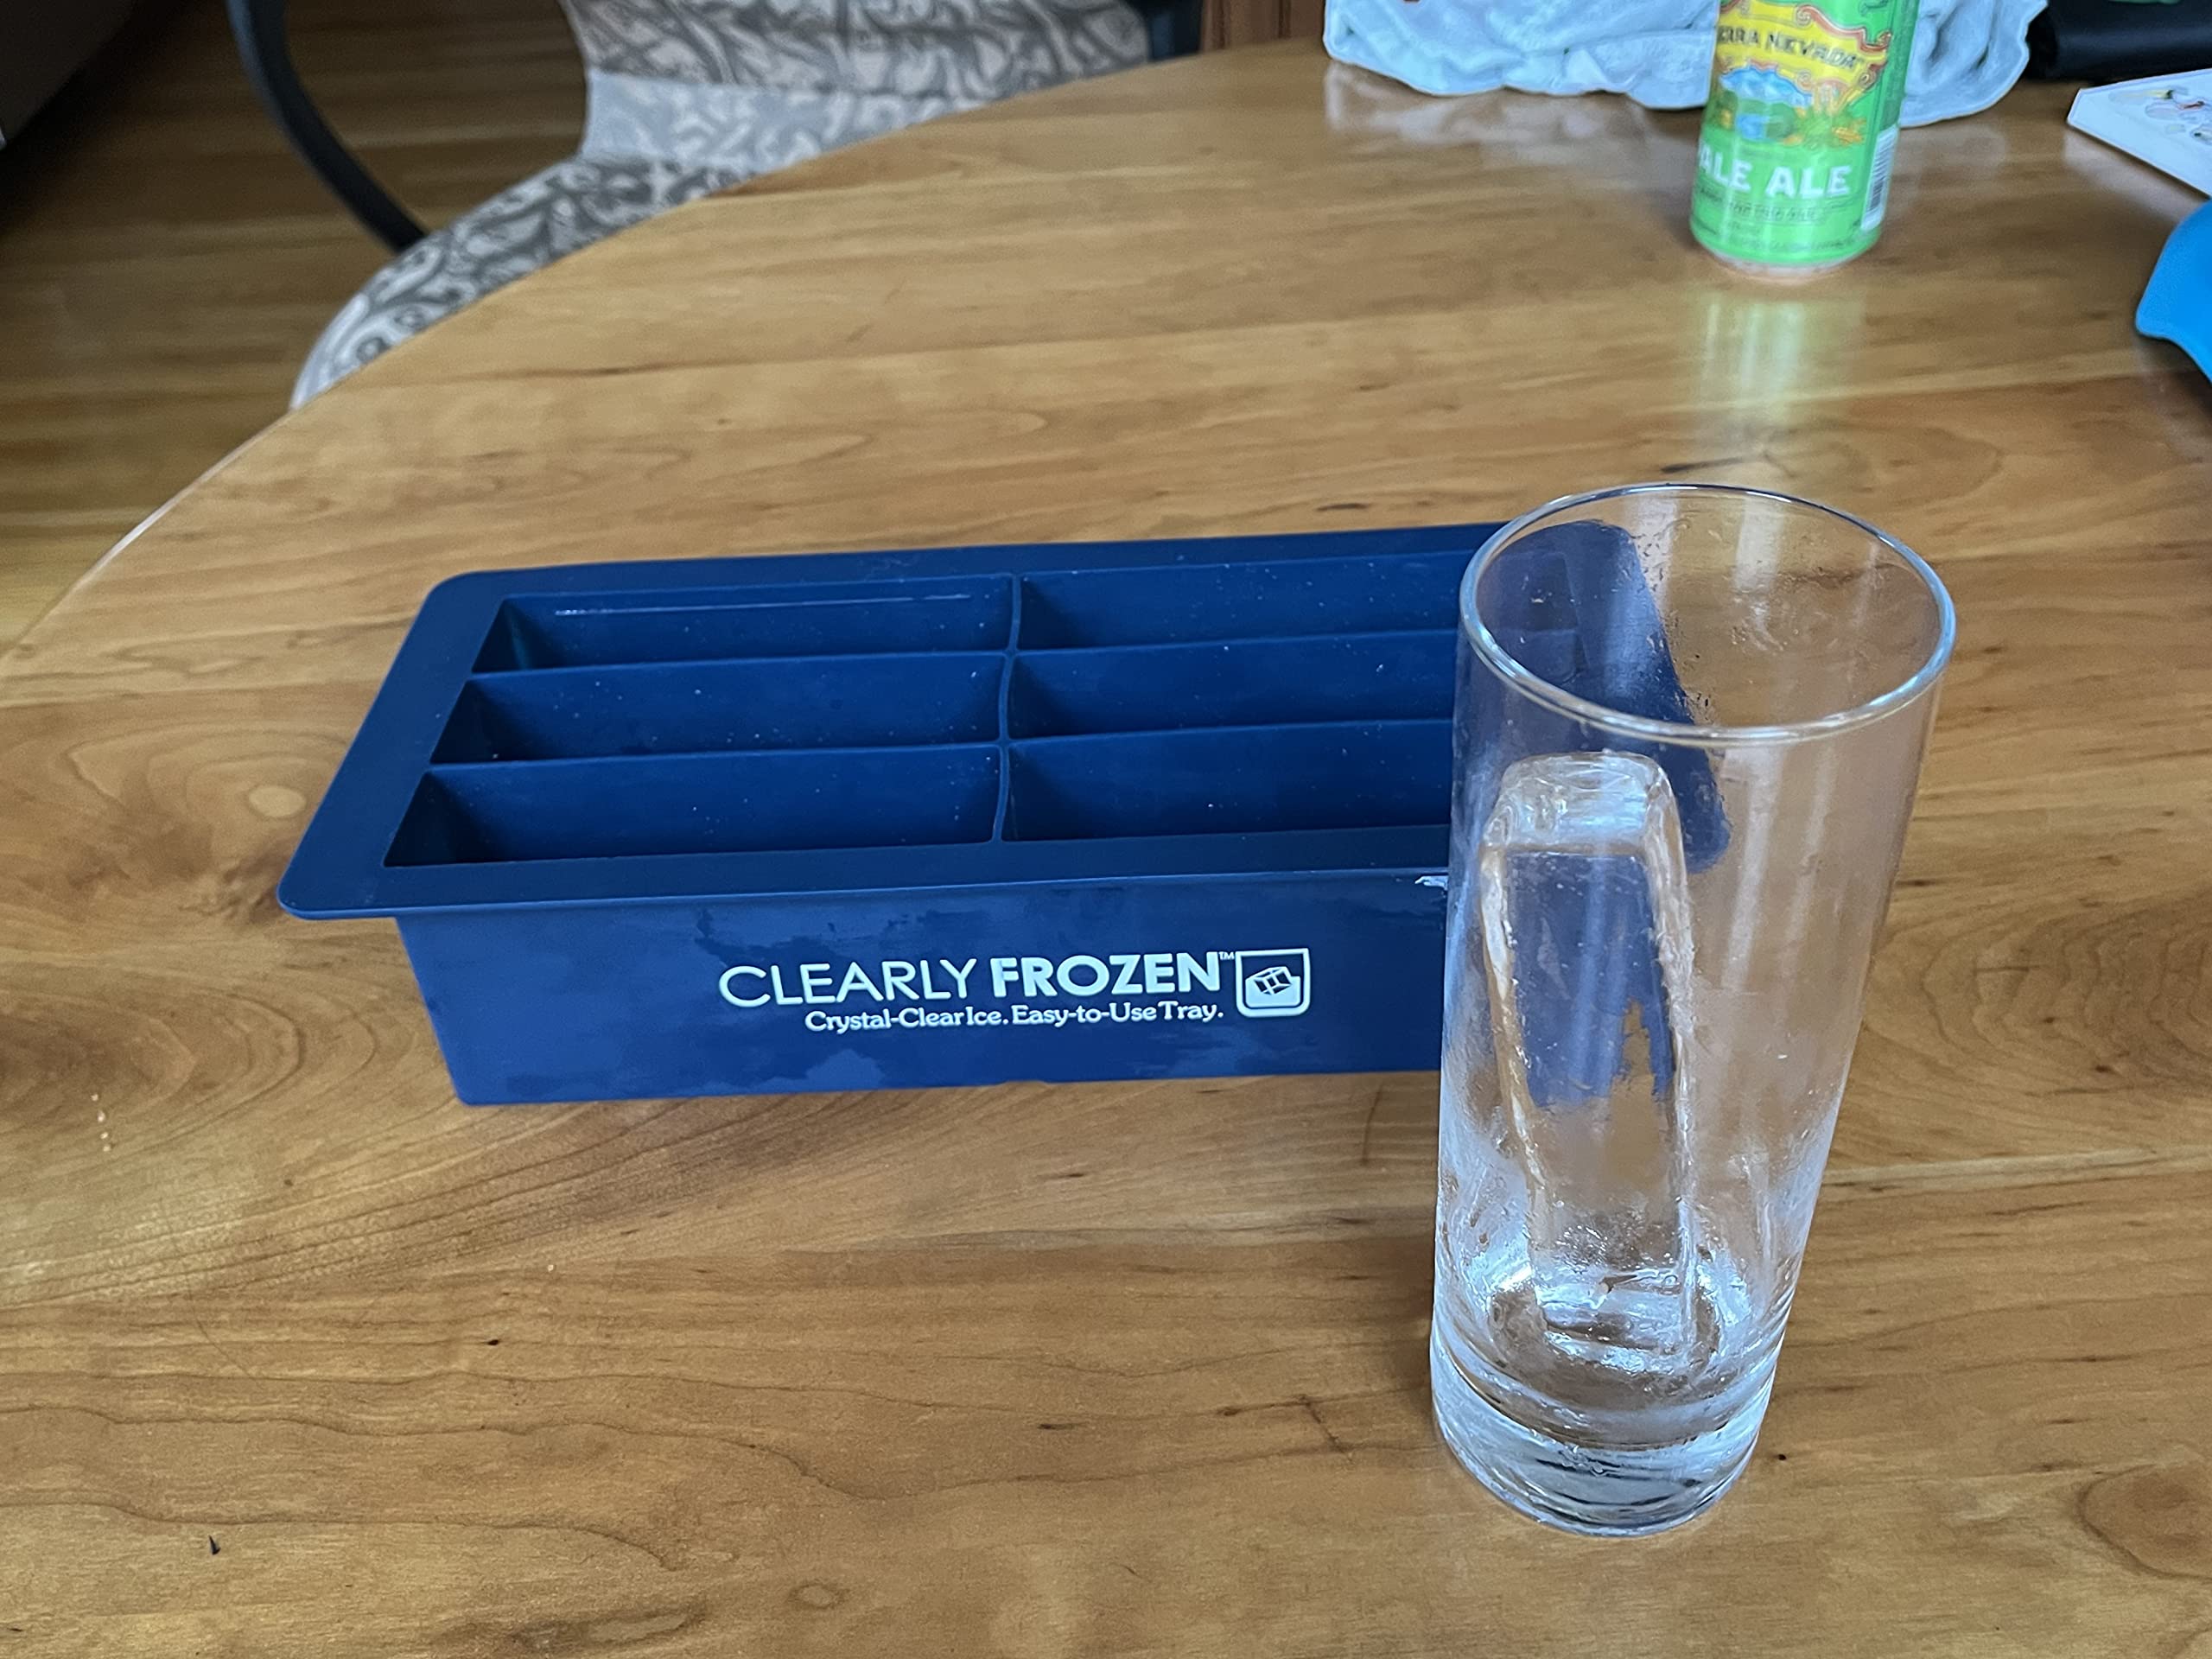 ClearlyFrozen High Capacity (Six 1.3” x 1.3” x 5” Ice Spears) Home Clear Ice Tray/Ice Maker With Multi-Size Mold Design Expandable to Six 1.3” x 2” x 5” Ice Slabs.